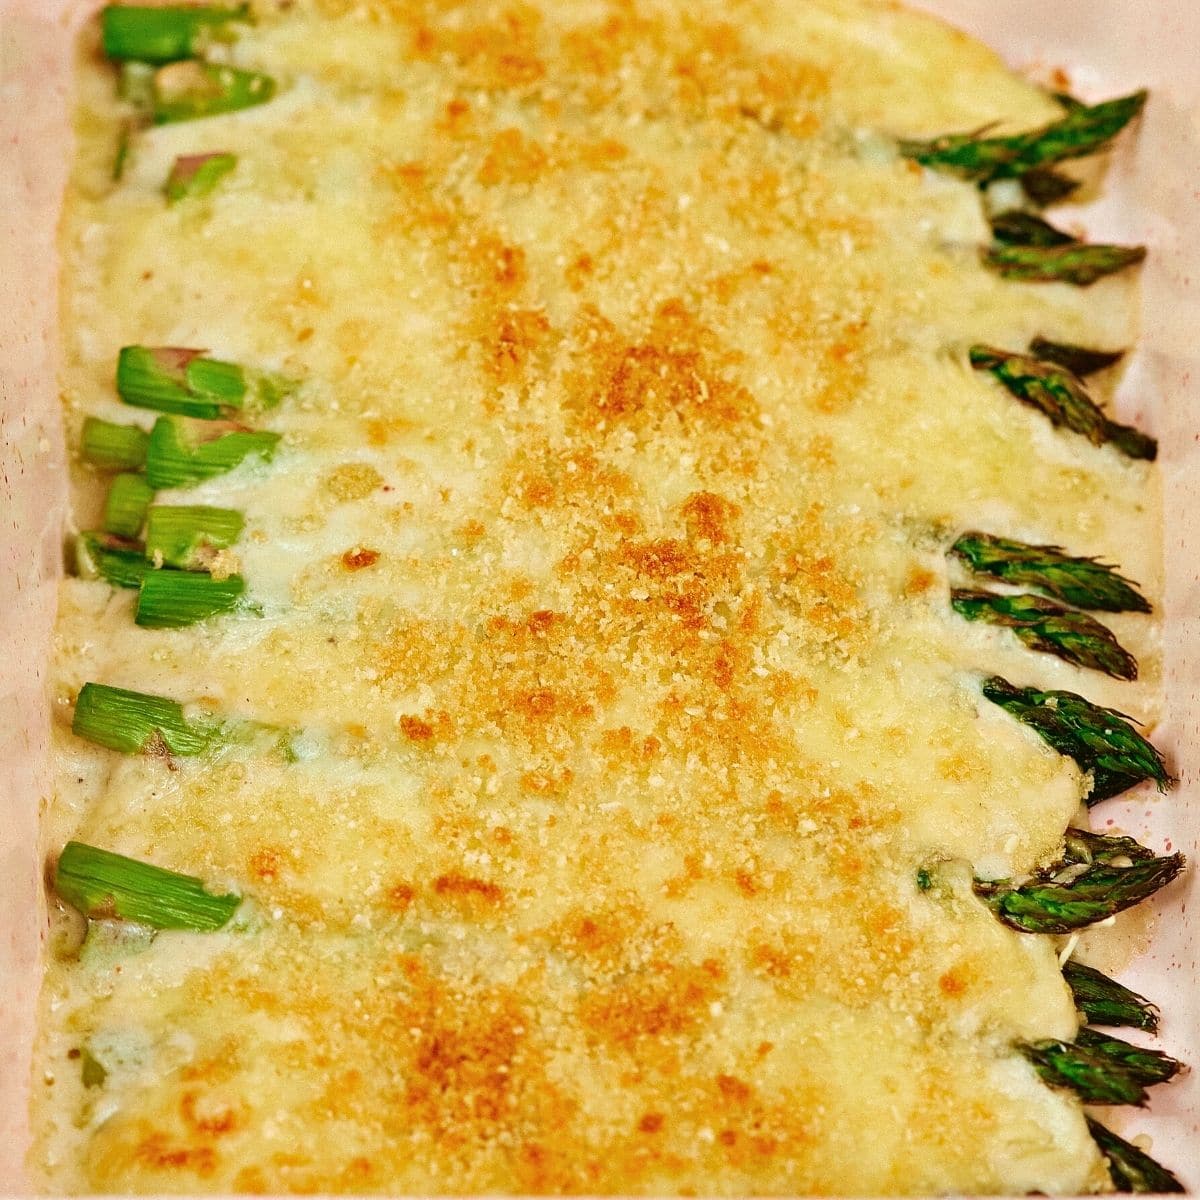 Asparagus casserole freshly baked in a ceramic cooking bowl.